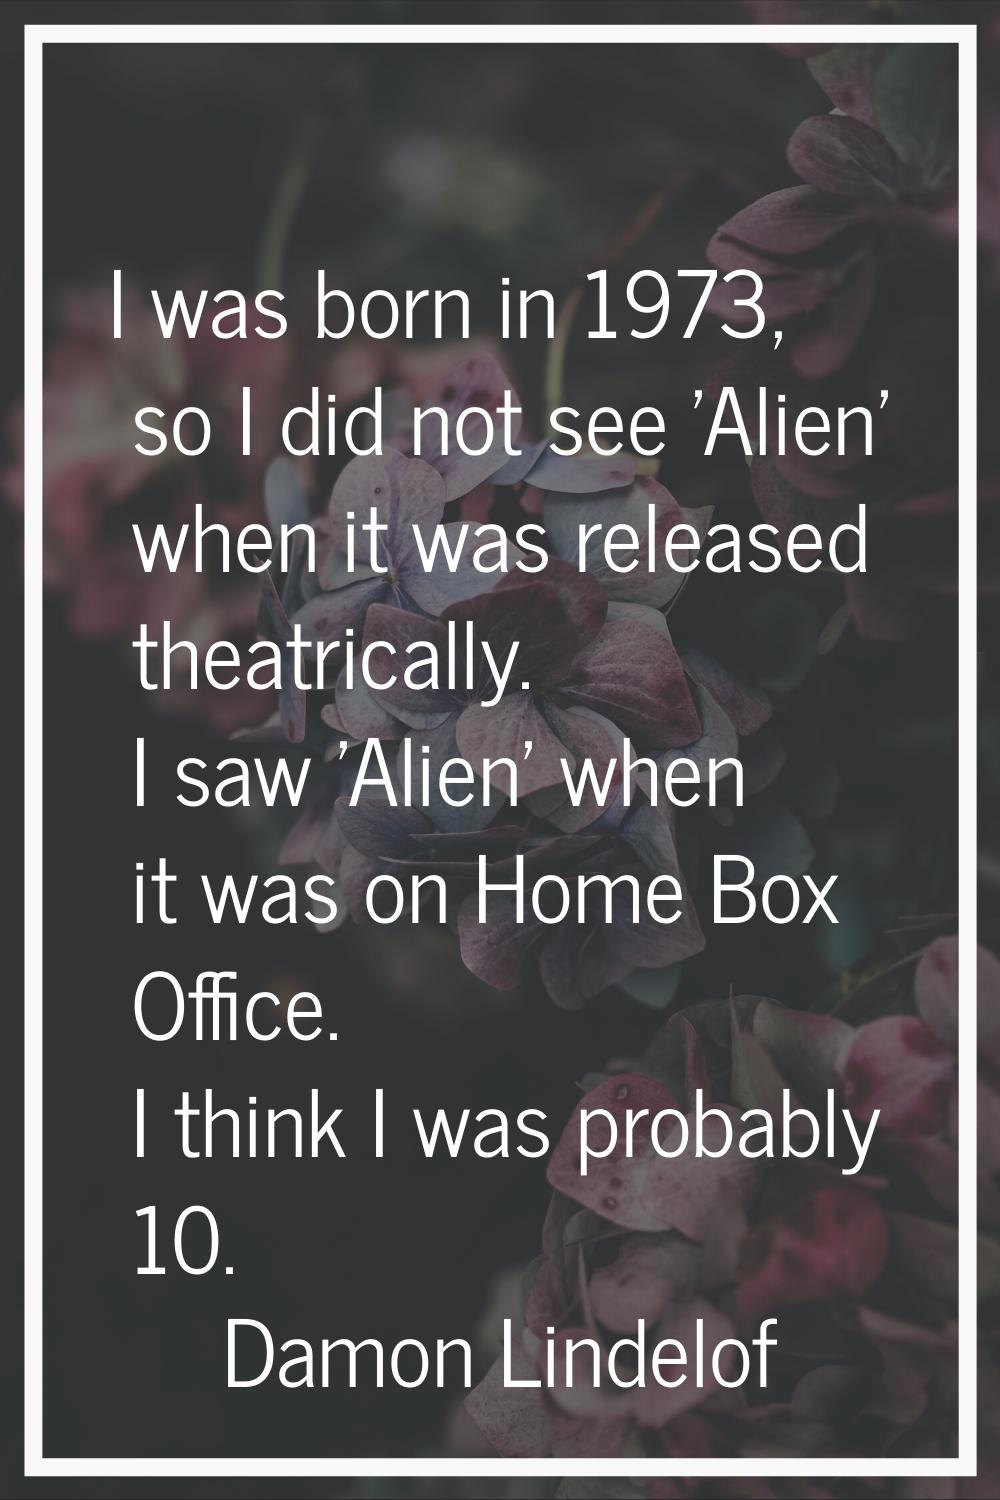 I was born in 1973, so I did not see 'Alien' when it was released theatrically. I saw 'Alien' when 